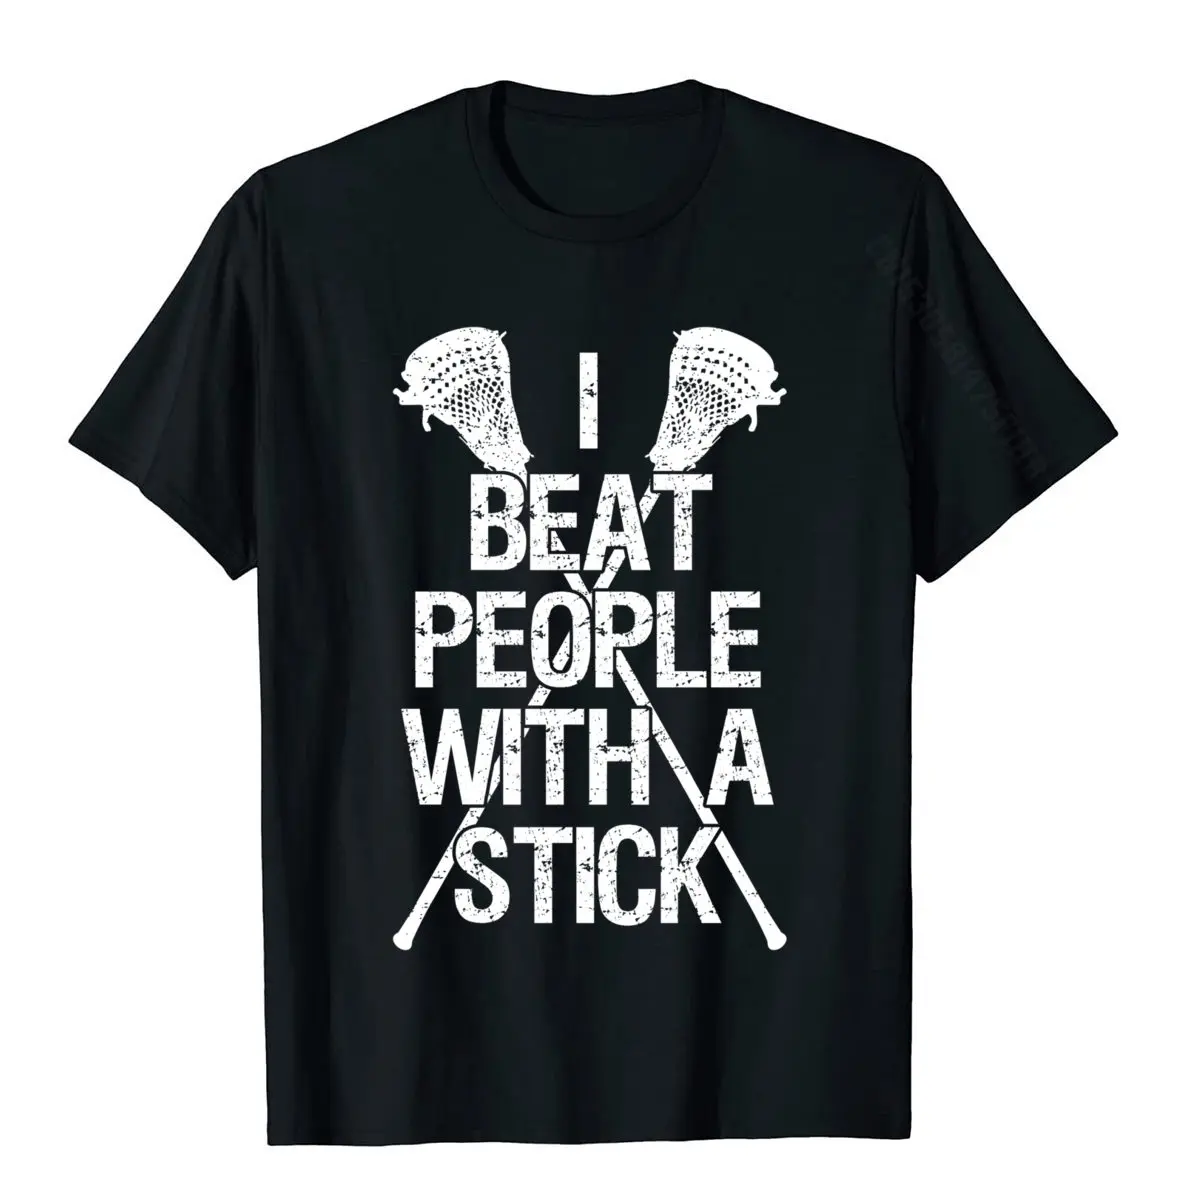 

Lacrosse Player I BEAT PEOPLE WITH A STICK Funny Lax Lover Casual Printed On Tops Shirts Coupons Cotton Men Tshirts